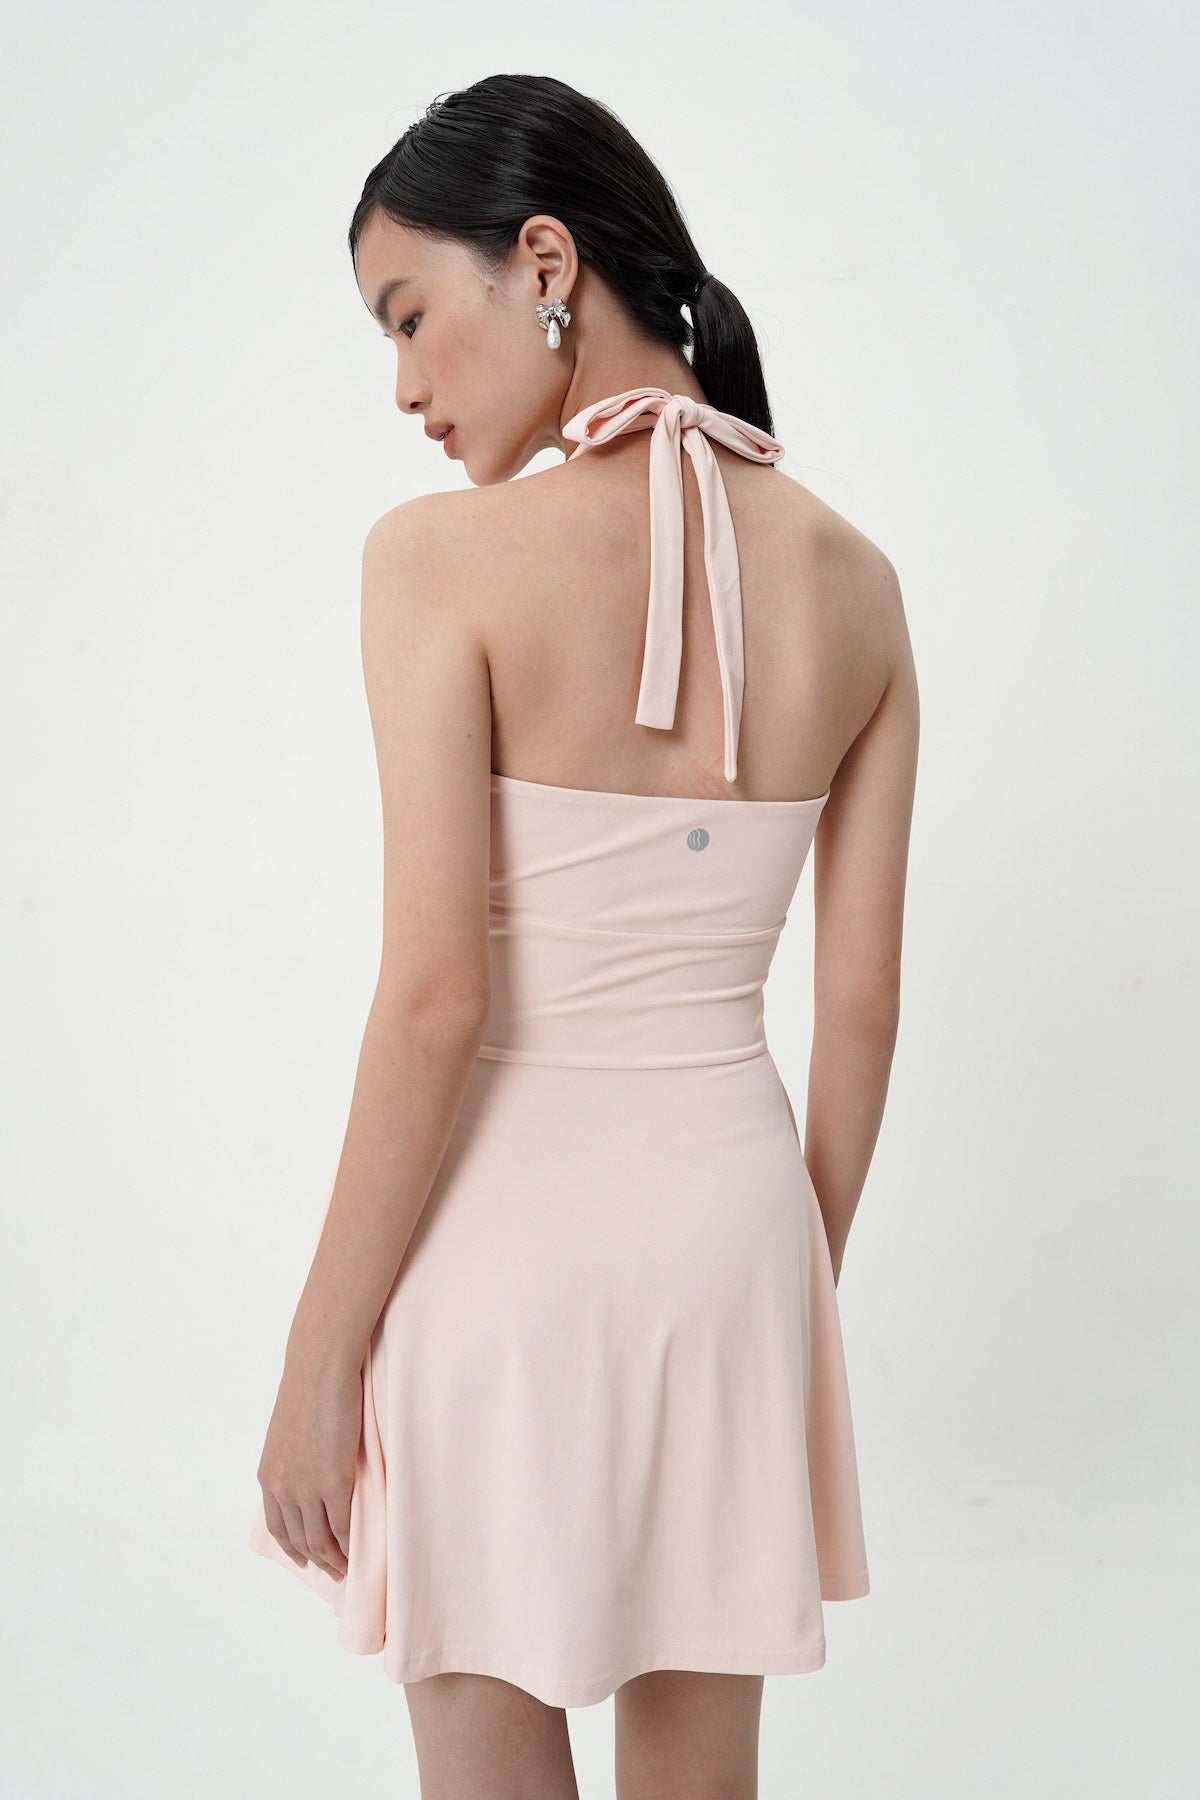 Expressive Dress in Pink